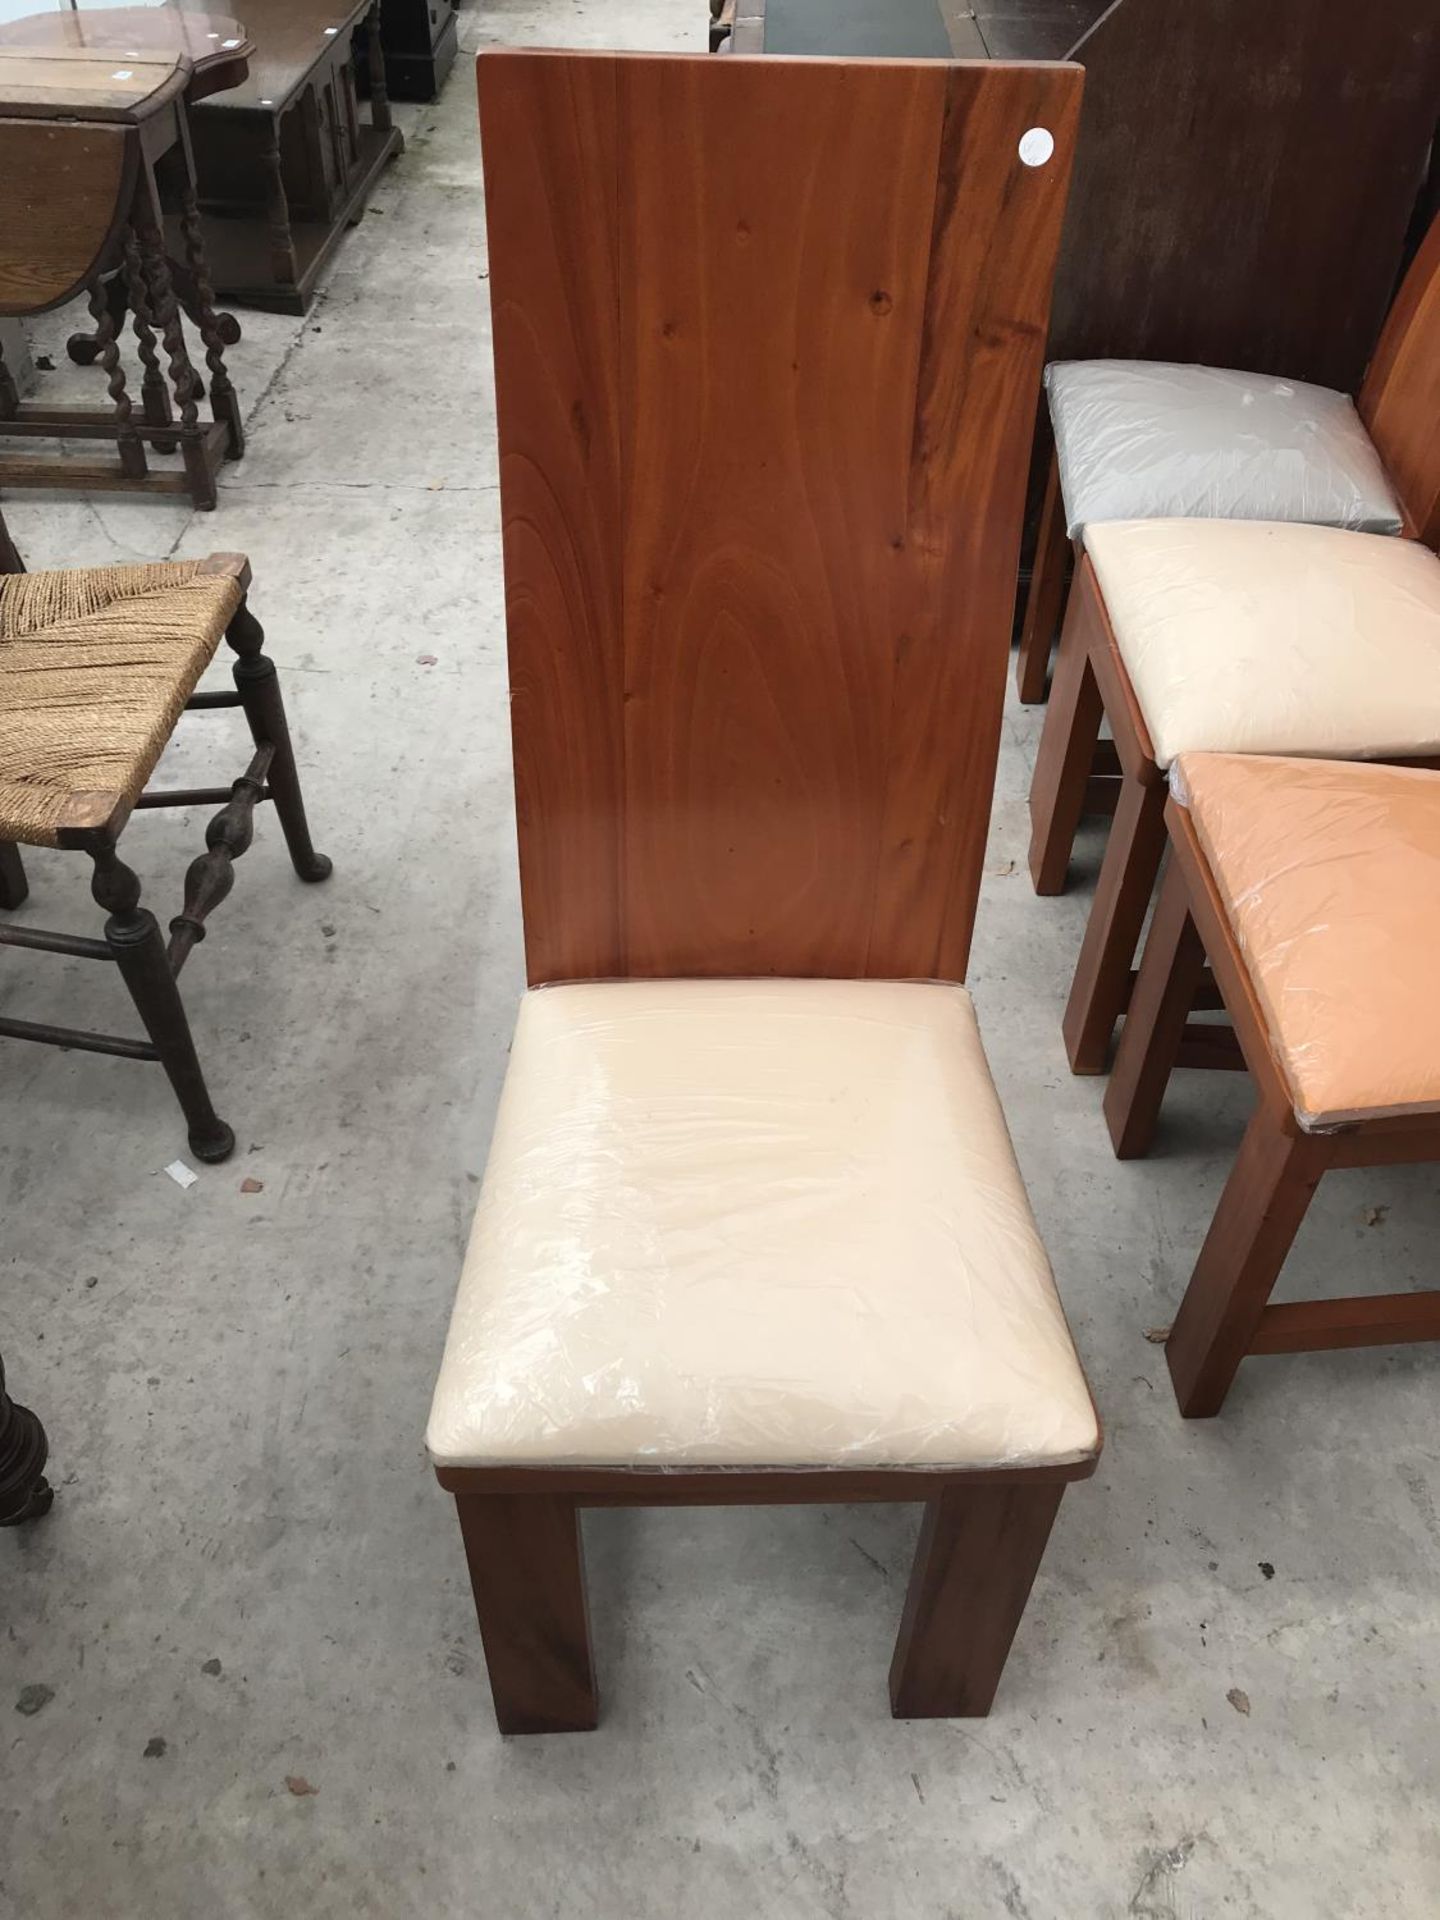 FOUR HIGH BACKED HARDWOOD DINING CHAIRS - Image 2 of 3